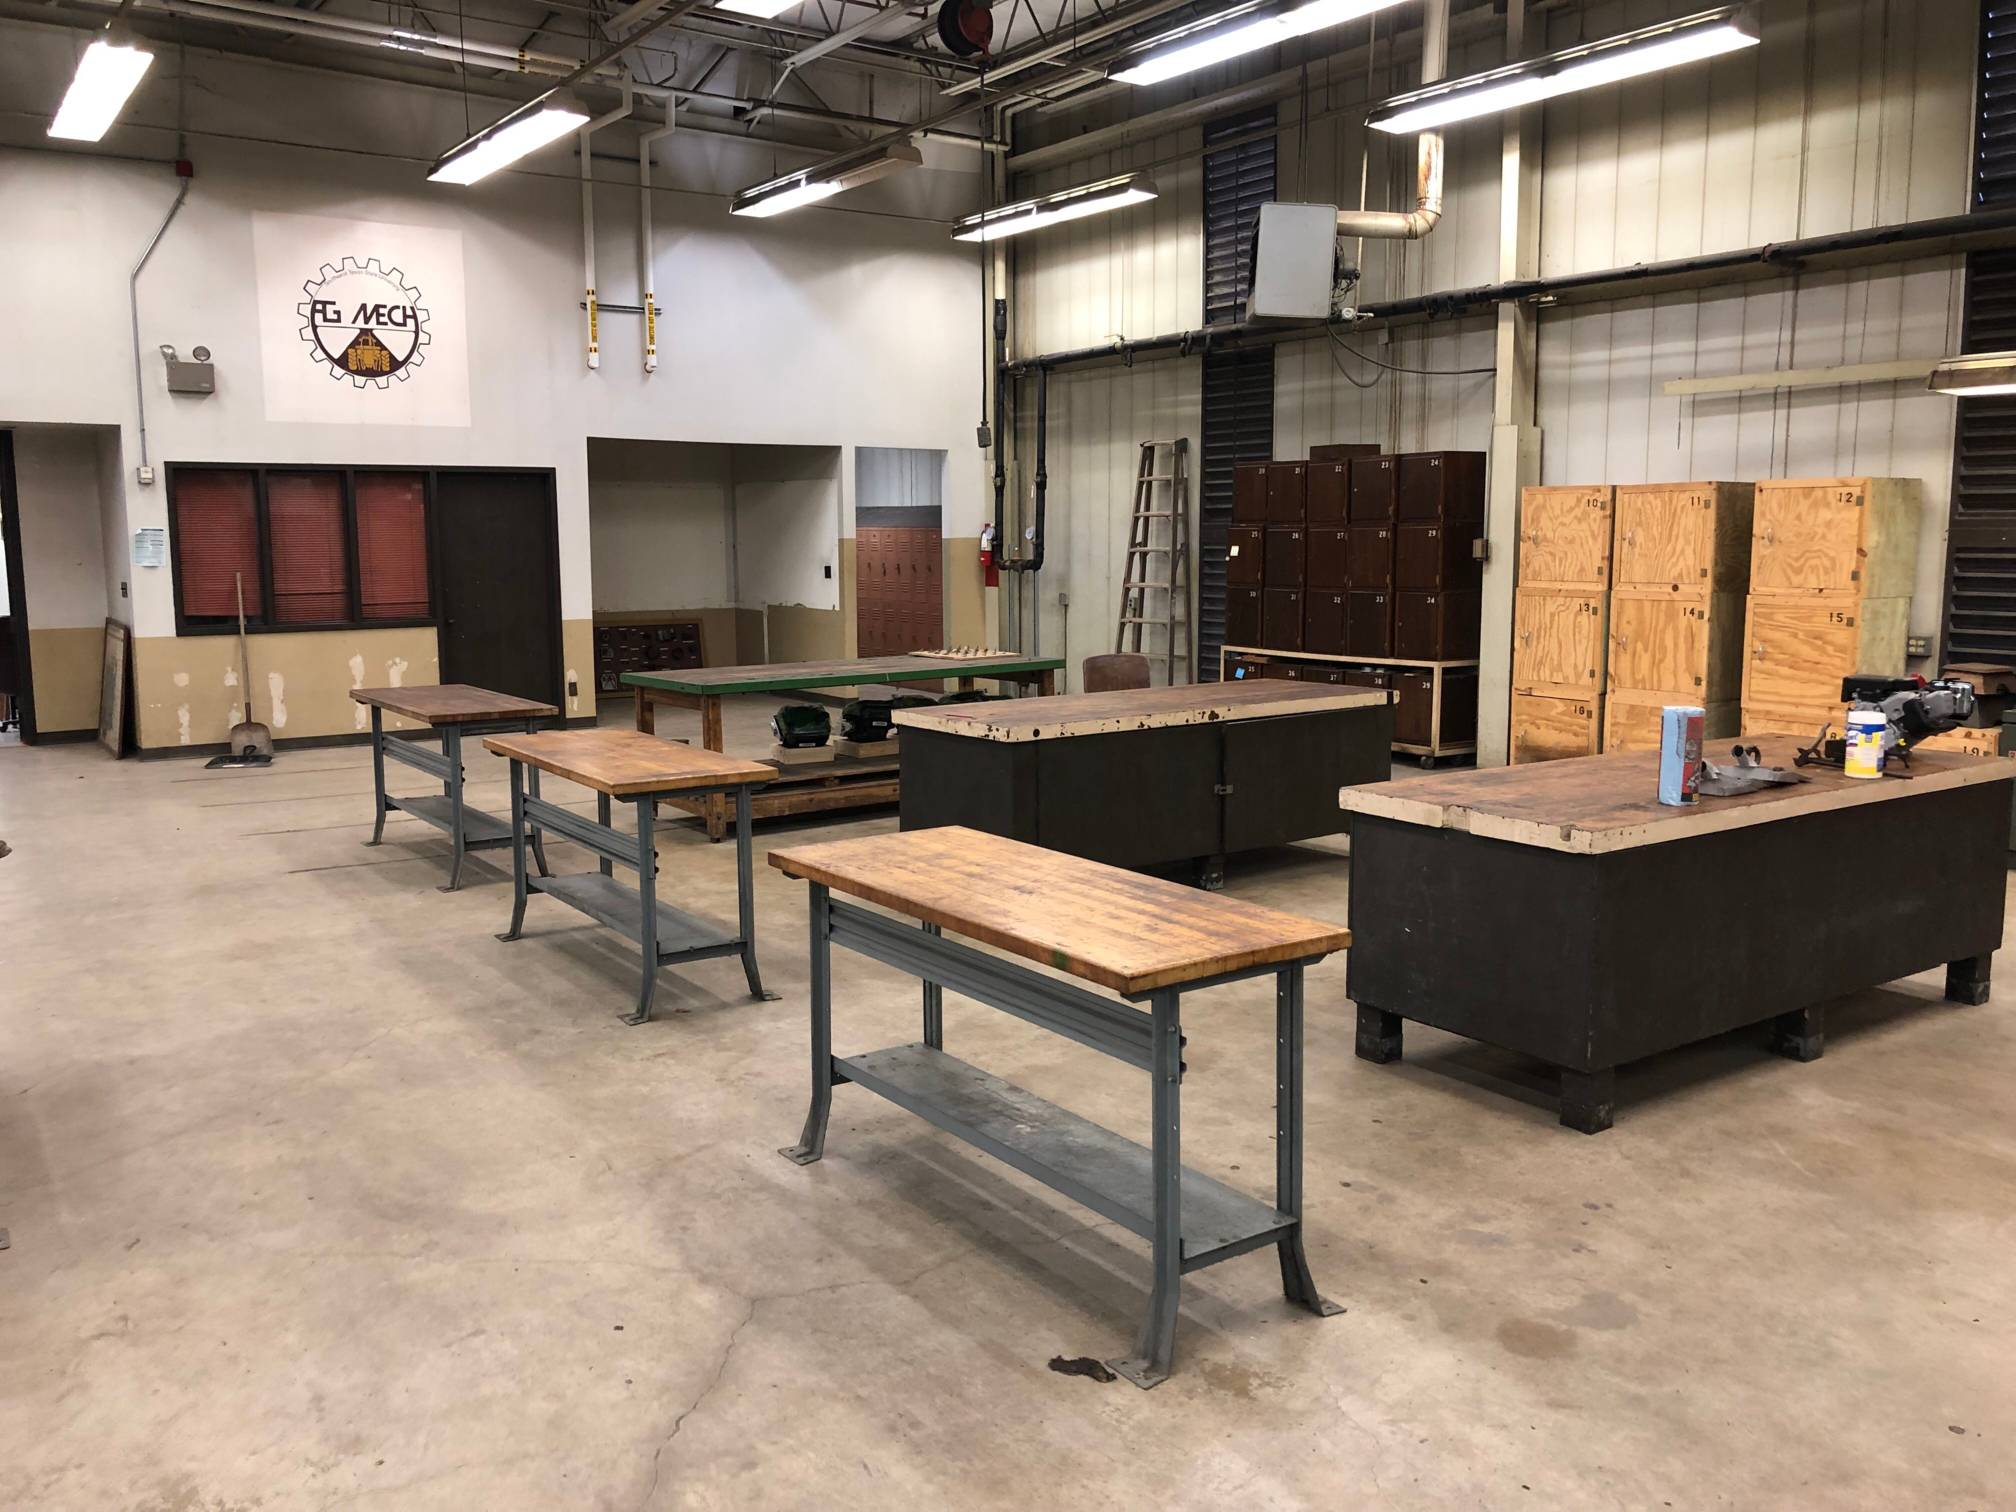 Machine shop with tables